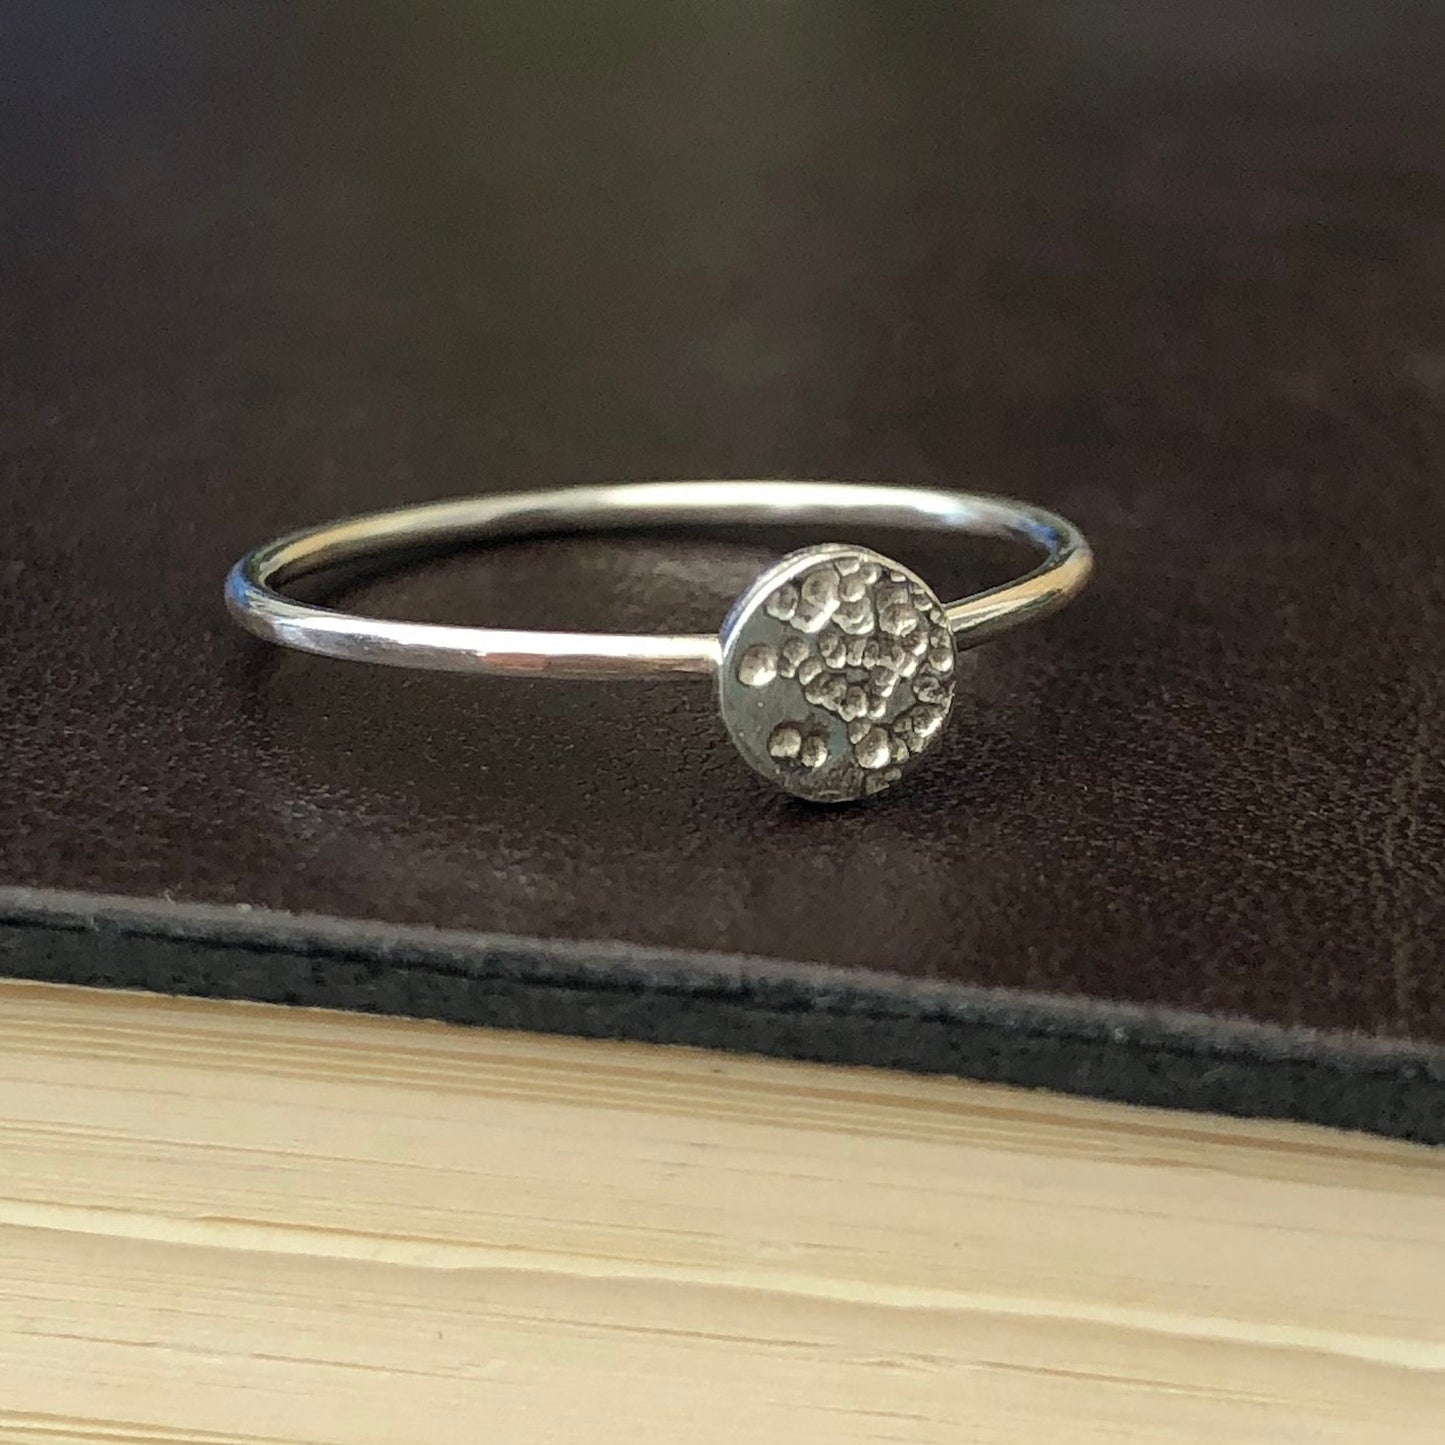 Sterling Silver Tiny Full Moon Ring, Celestial Friendship Jewellery, Slim Band Ring